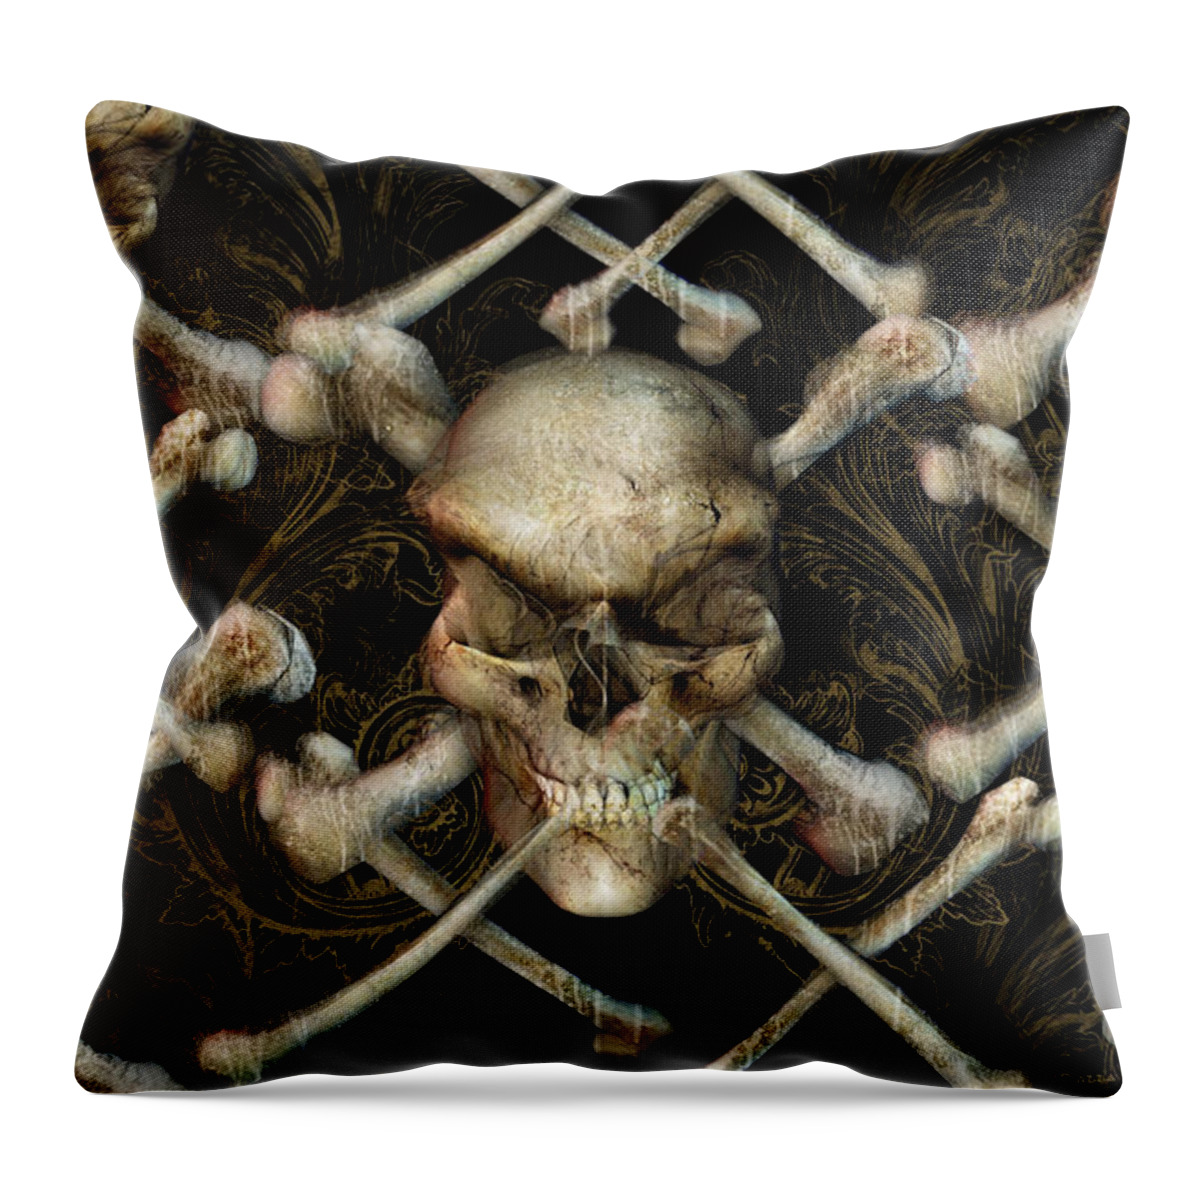 Skull Throw Pillow featuring the painting Skull N Bones by JQ Licensing